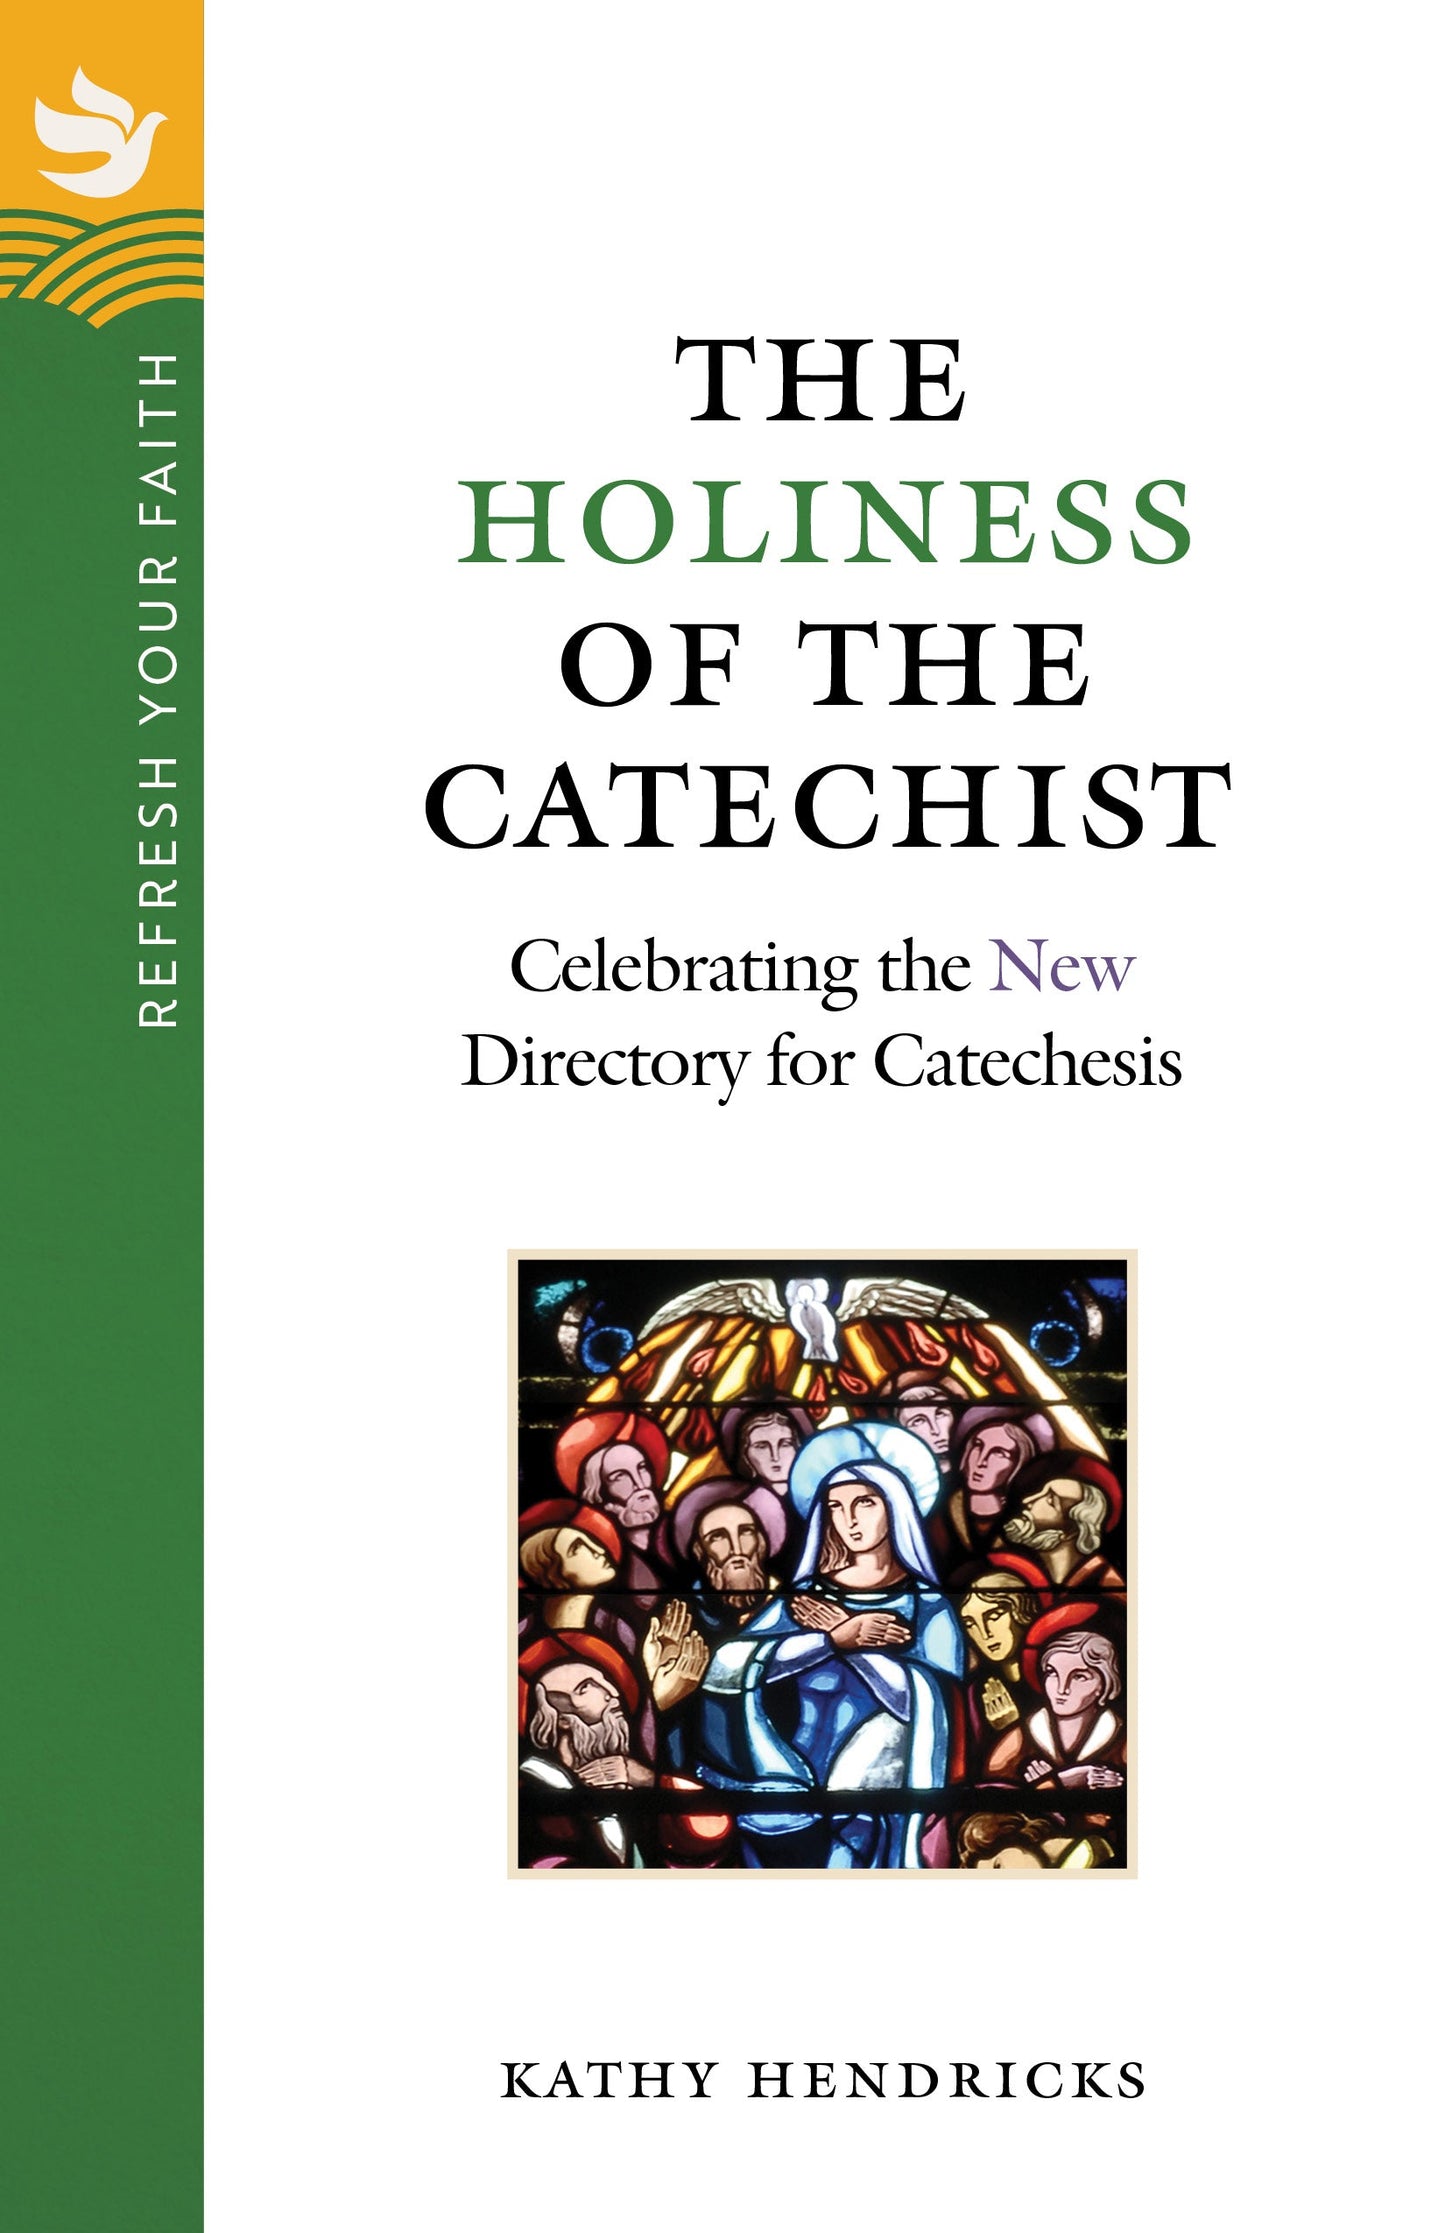 SALE - The Holiness of the Catechist